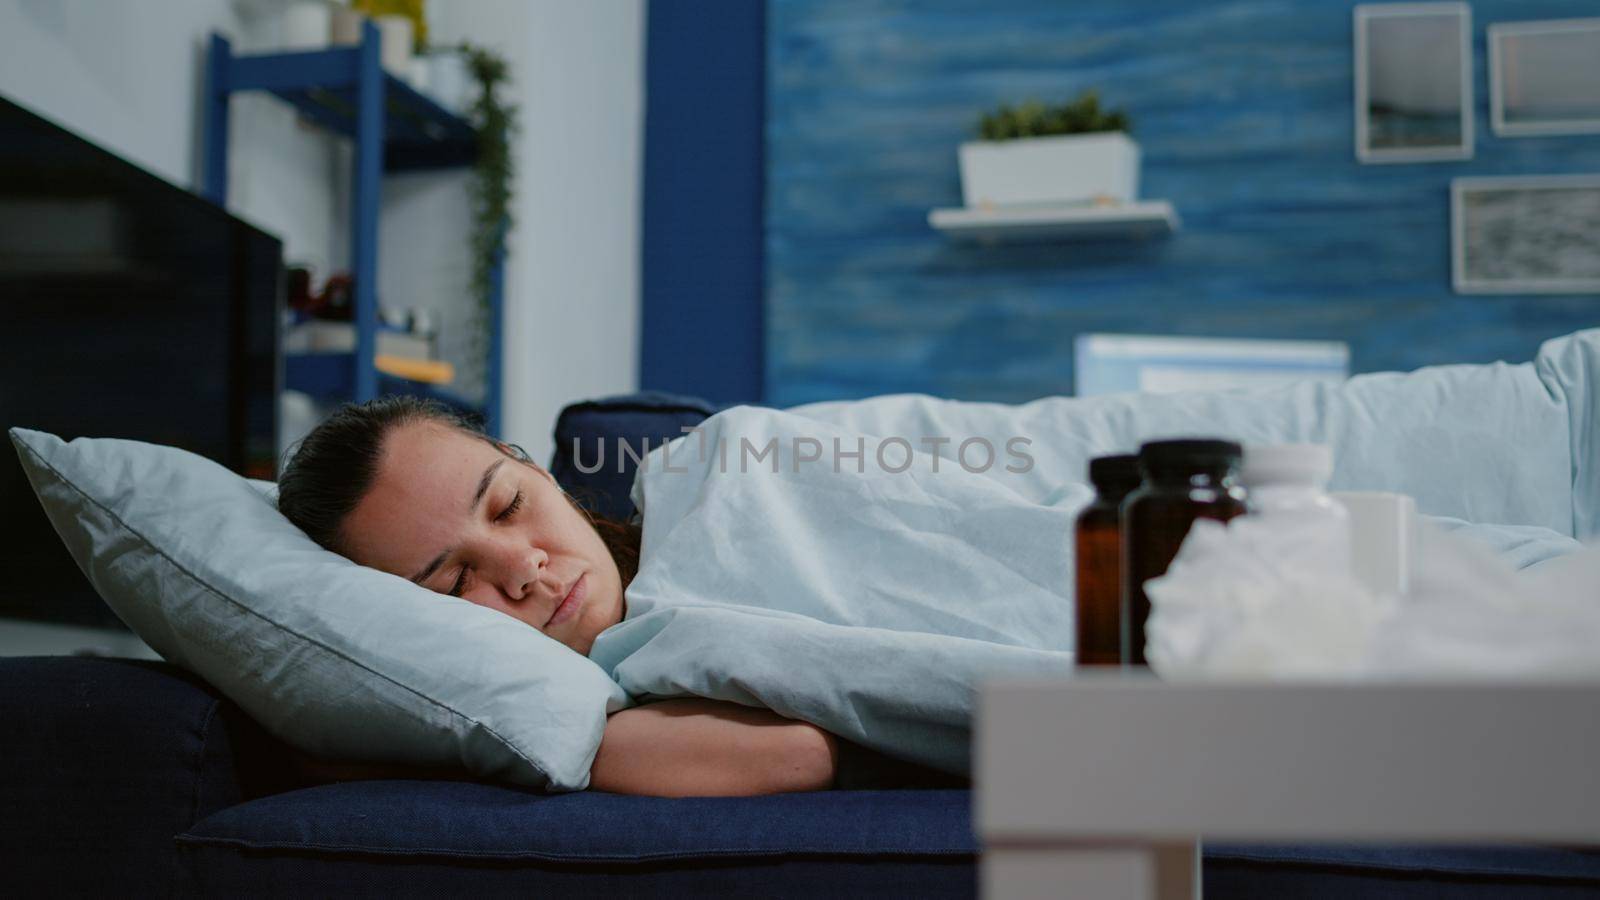 Close up of woman with disease sleeping in blanket on couch while having treatment against seasonal flu on coffee table. Sick adult resting with tissues, bottles of pills and medicaments.